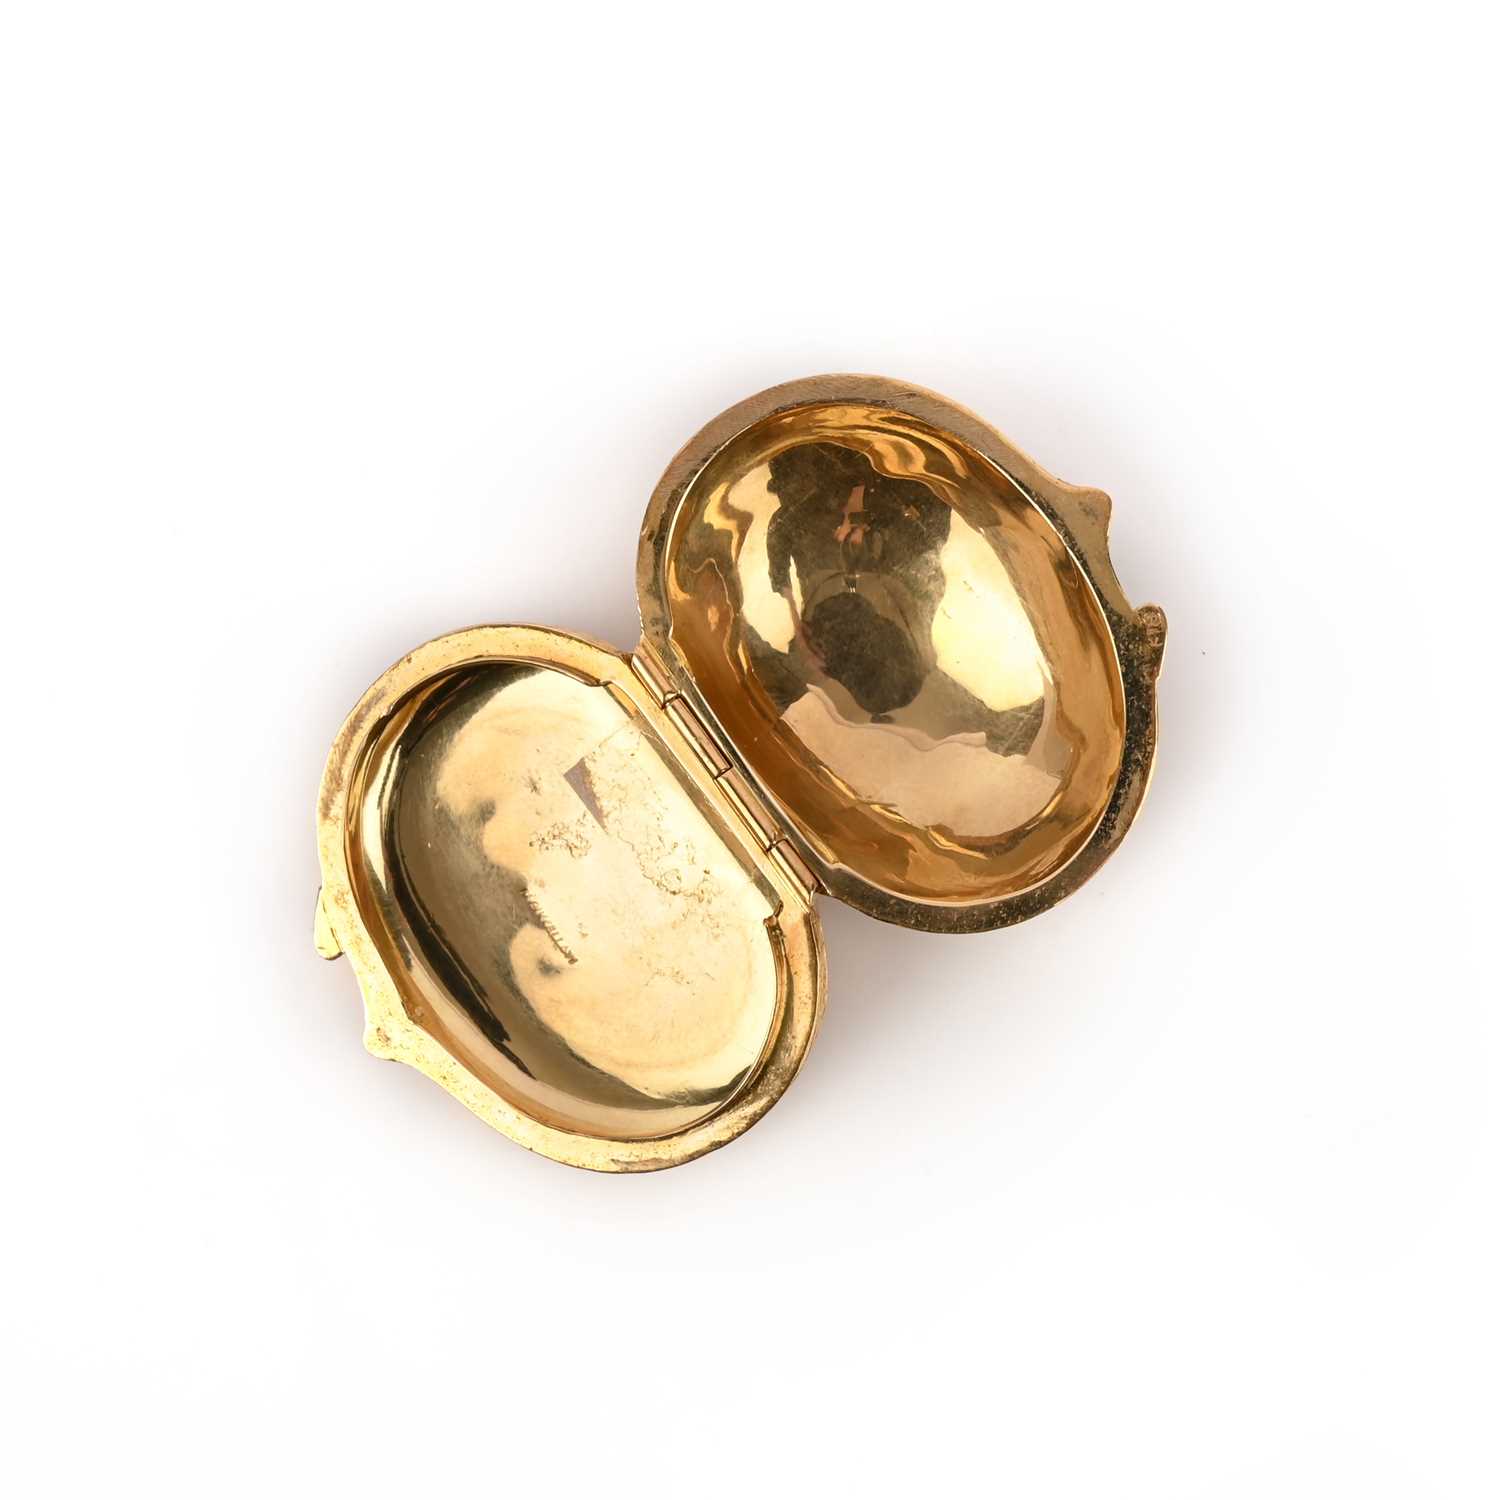 Mario Buccellati, a gold pillbox, mid 20th century, designed as a chestnut, the exterior engraved, - Image 2 of 2